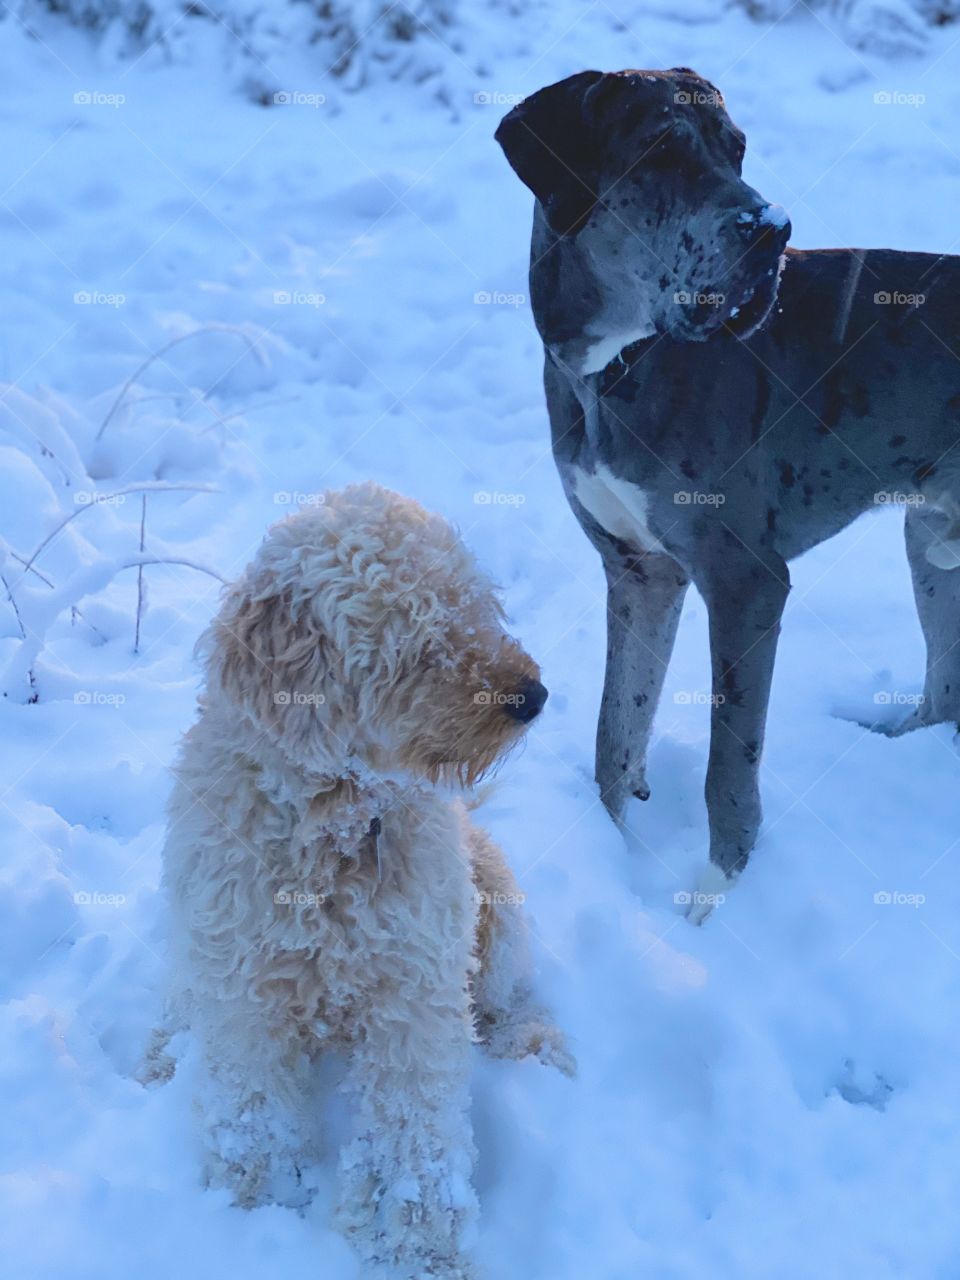 Dogs (Golden Retriever/Poodle and Great Dane/Mastiff mix) enjoying the winter storm in Northeast Pennsylvania USA